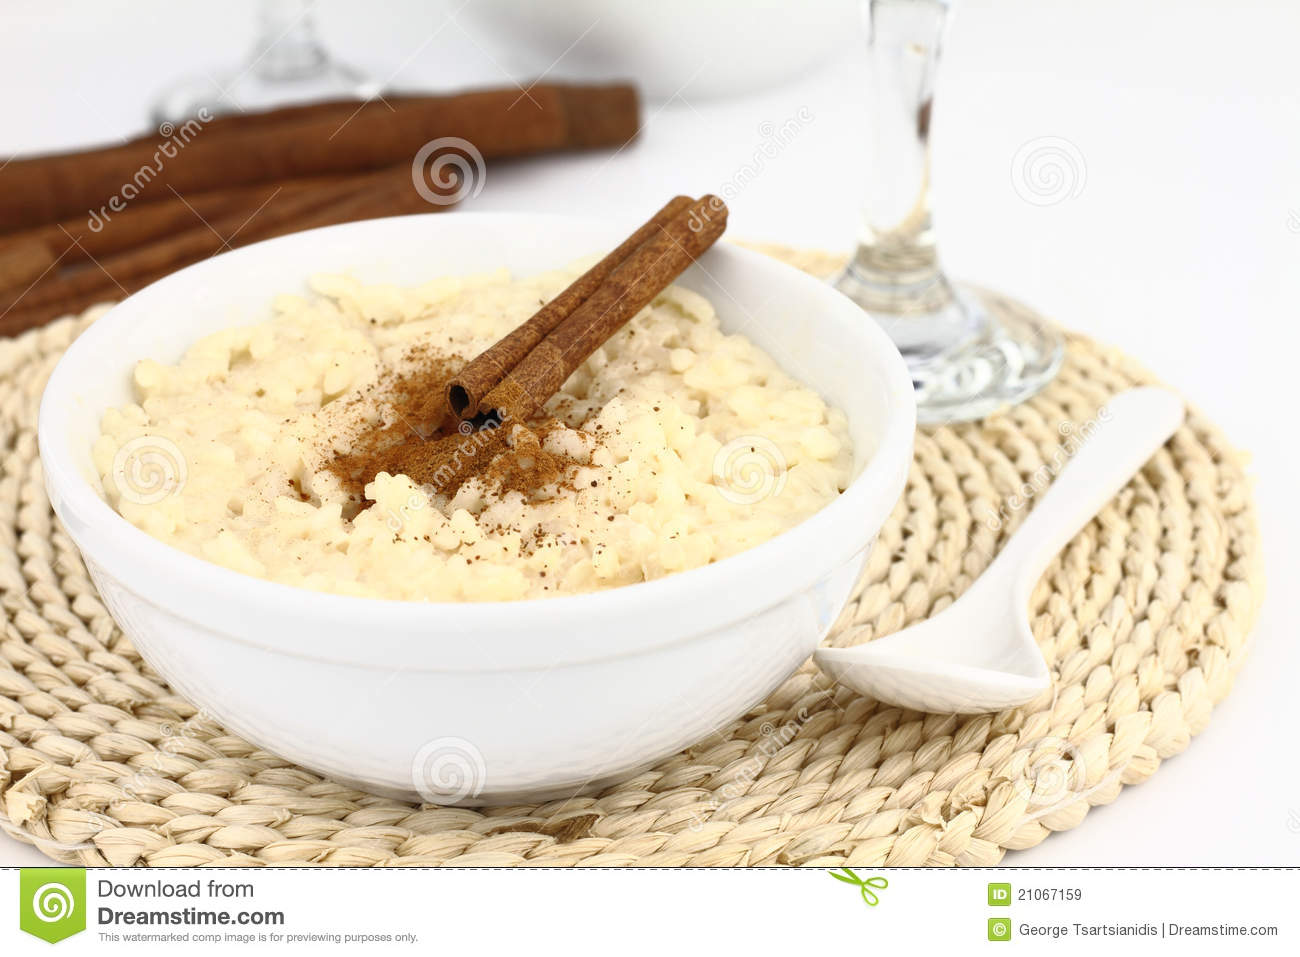 Rice Pudding On A Bowl Royalty Free Stock Images   Image  21067159